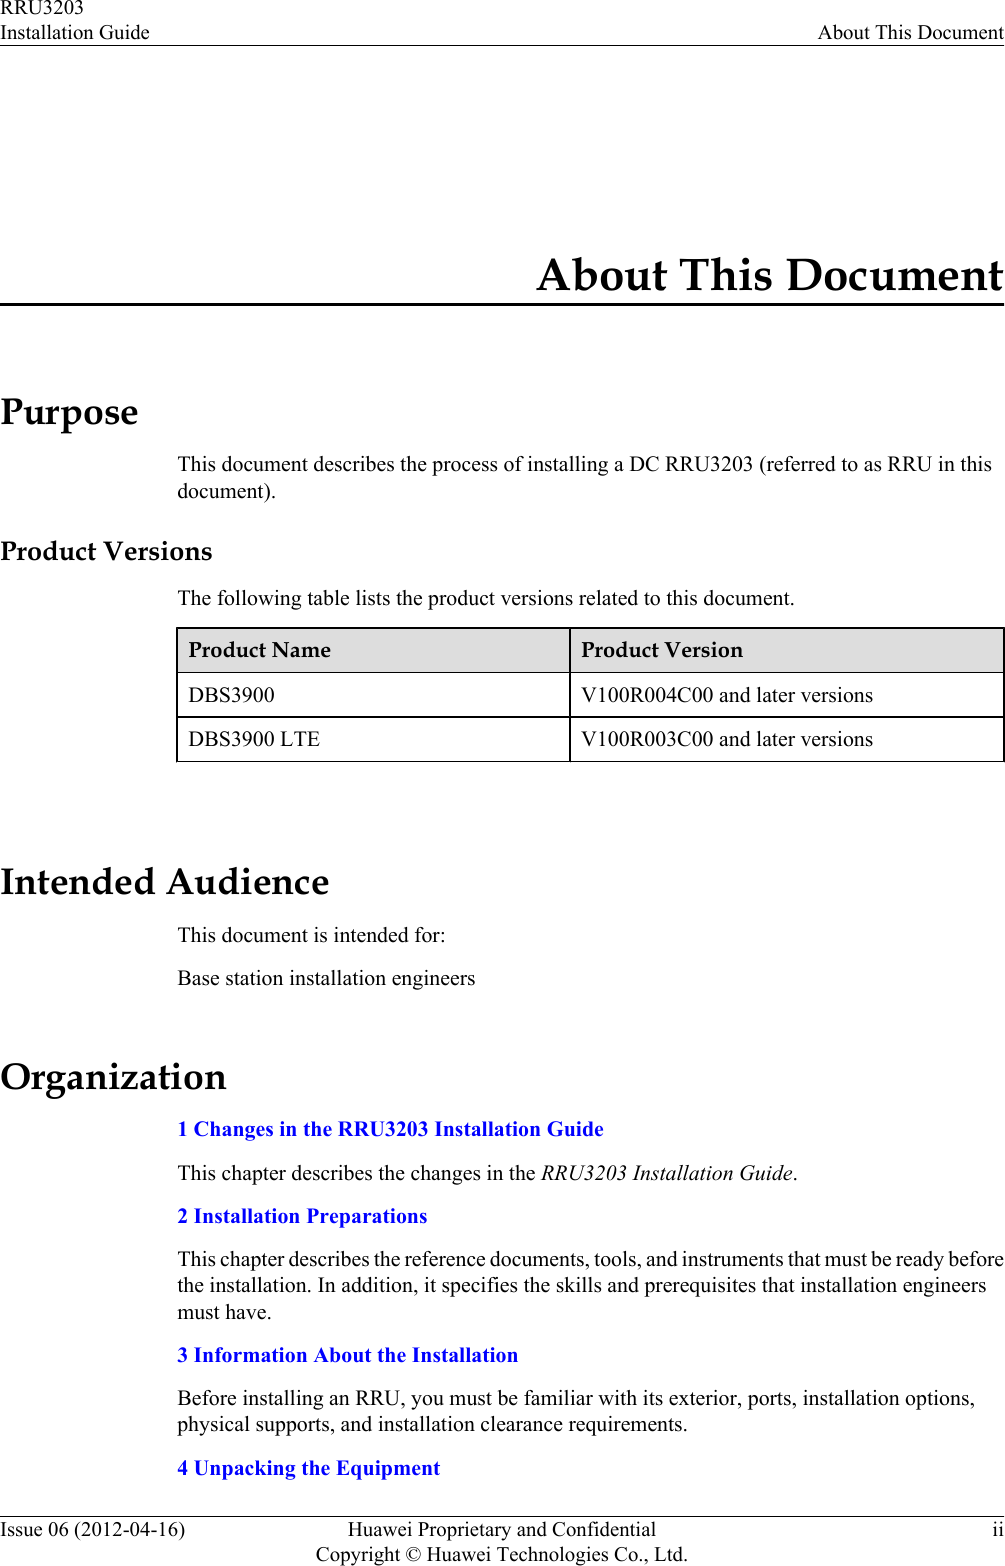 About This DocumentPurposeThis document describes the process of installing a DC RRU3203 (referred to as RRU in thisdocument).Product VersionsThe following table lists the product versions related to this document.Product Name Product VersionDBS3900 V100R004C00 and later versionsDBS3900 LTE V100R003C00 and later versions Intended AudienceThis document is intended for:Base station installation engineersOrganization1 Changes in the RRU3203 Installation GuideThis chapter describes the changes in the RRU3203 Installation Guide.2 Installation PreparationsThis chapter describes the reference documents, tools, and instruments that must be ready beforethe installation. In addition, it specifies the skills and prerequisites that installation engineersmust have.3 Information About the InstallationBefore installing an RRU, you must be familiar with its exterior, ports, installation options,physical supports, and installation clearance requirements.4 Unpacking the EquipmentRRU3203Installation Guide About This DocumentIssue 06 (2012-04-16) Huawei Proprietary and ConfidentialCopyright © Huawei Technologies Co., Ltd.ii